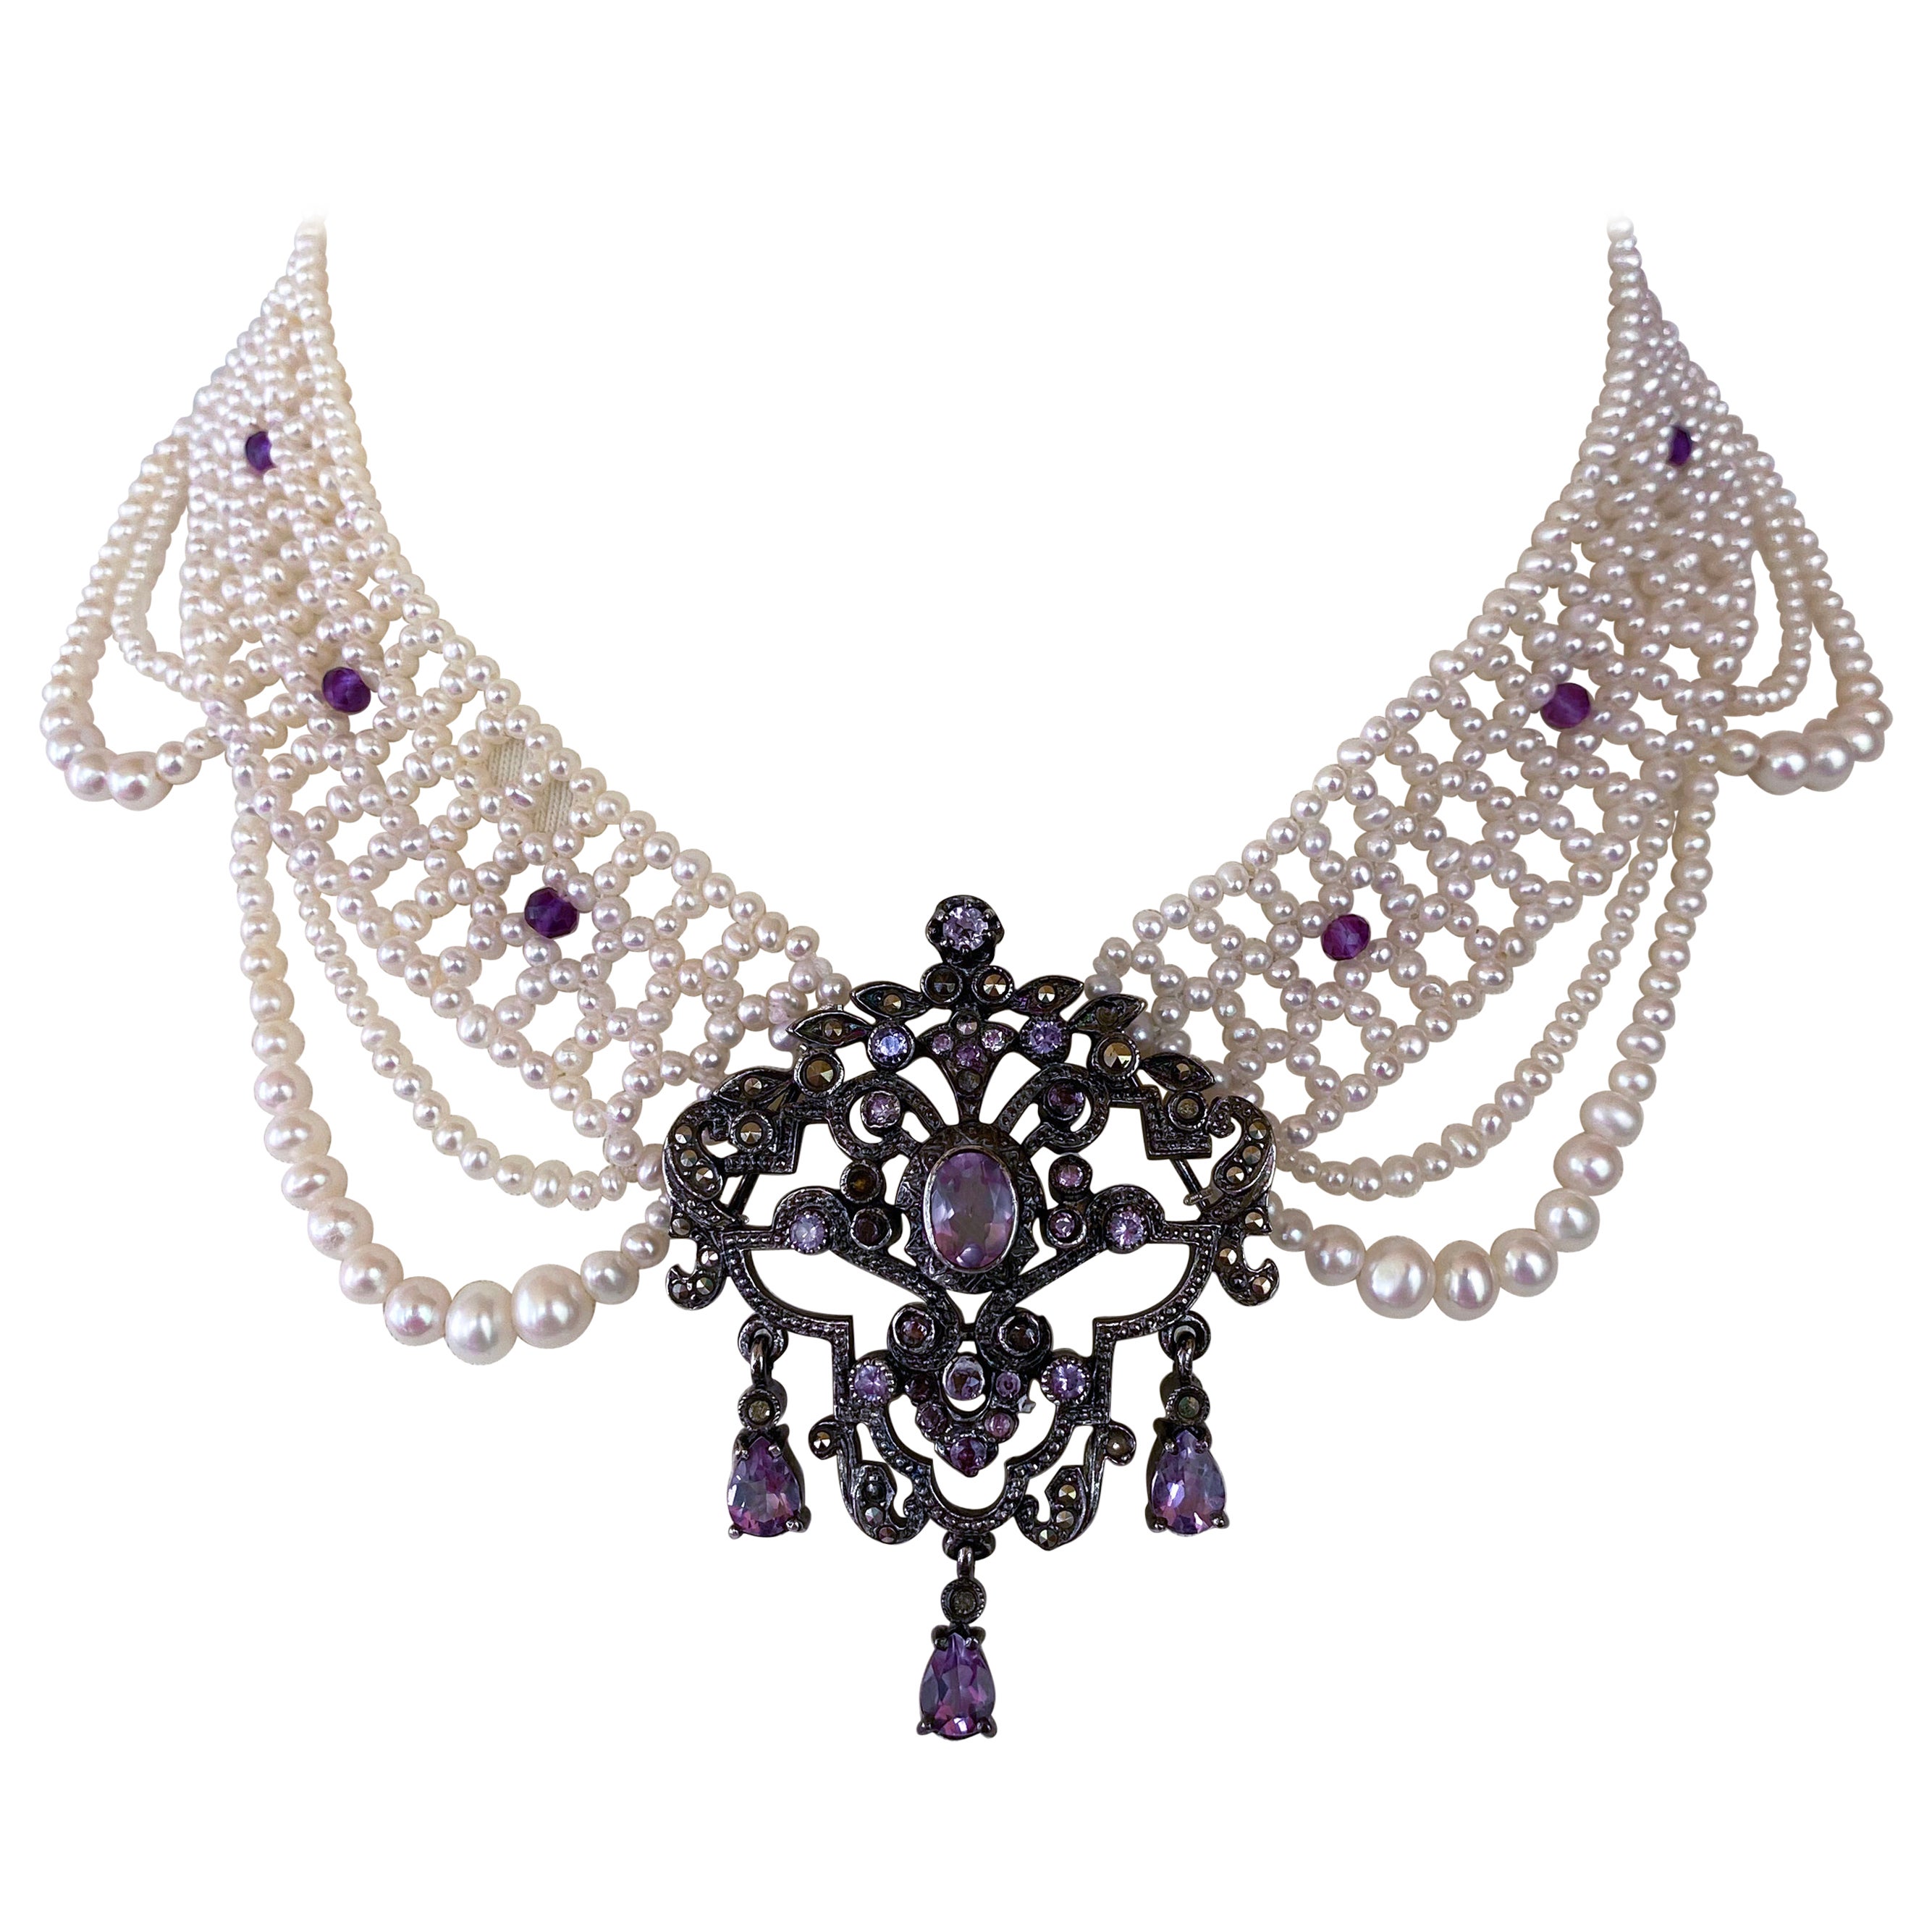 Marina J. Unique Pearl Draped Necklace with Vintage Amethyst Silver Centerpiece For Sale